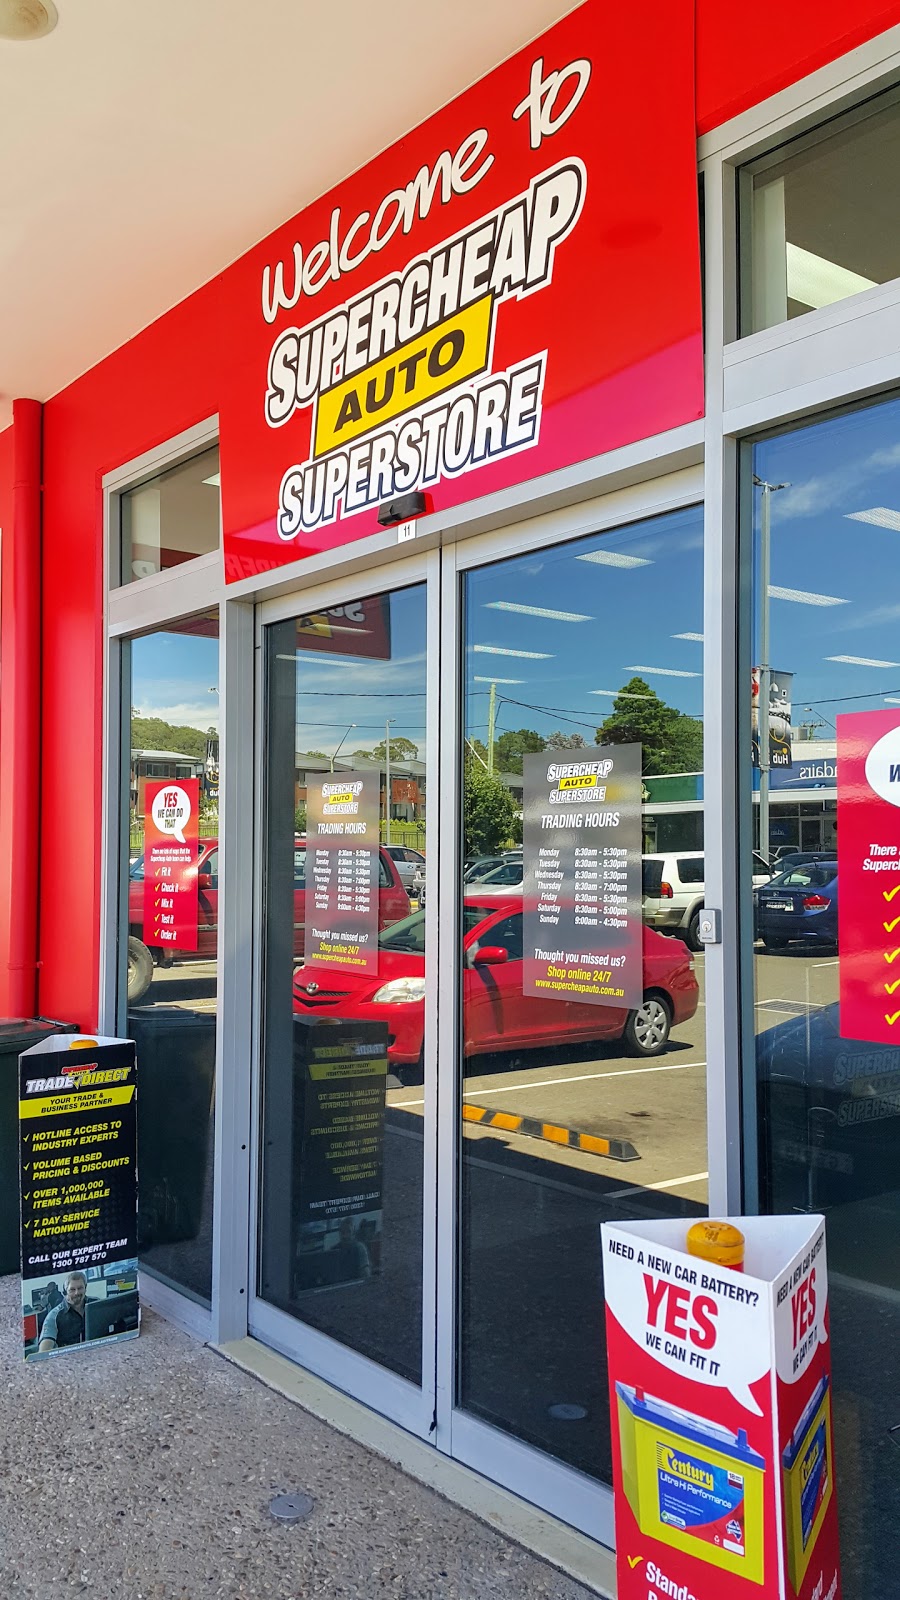 Supercheap Auto | car repair | S/R 10 Highland Homemaker Centre, Old Hume Hwy, Mittagong NSW 2575, Australia | 0248723820 OR +61 2 4872 3820